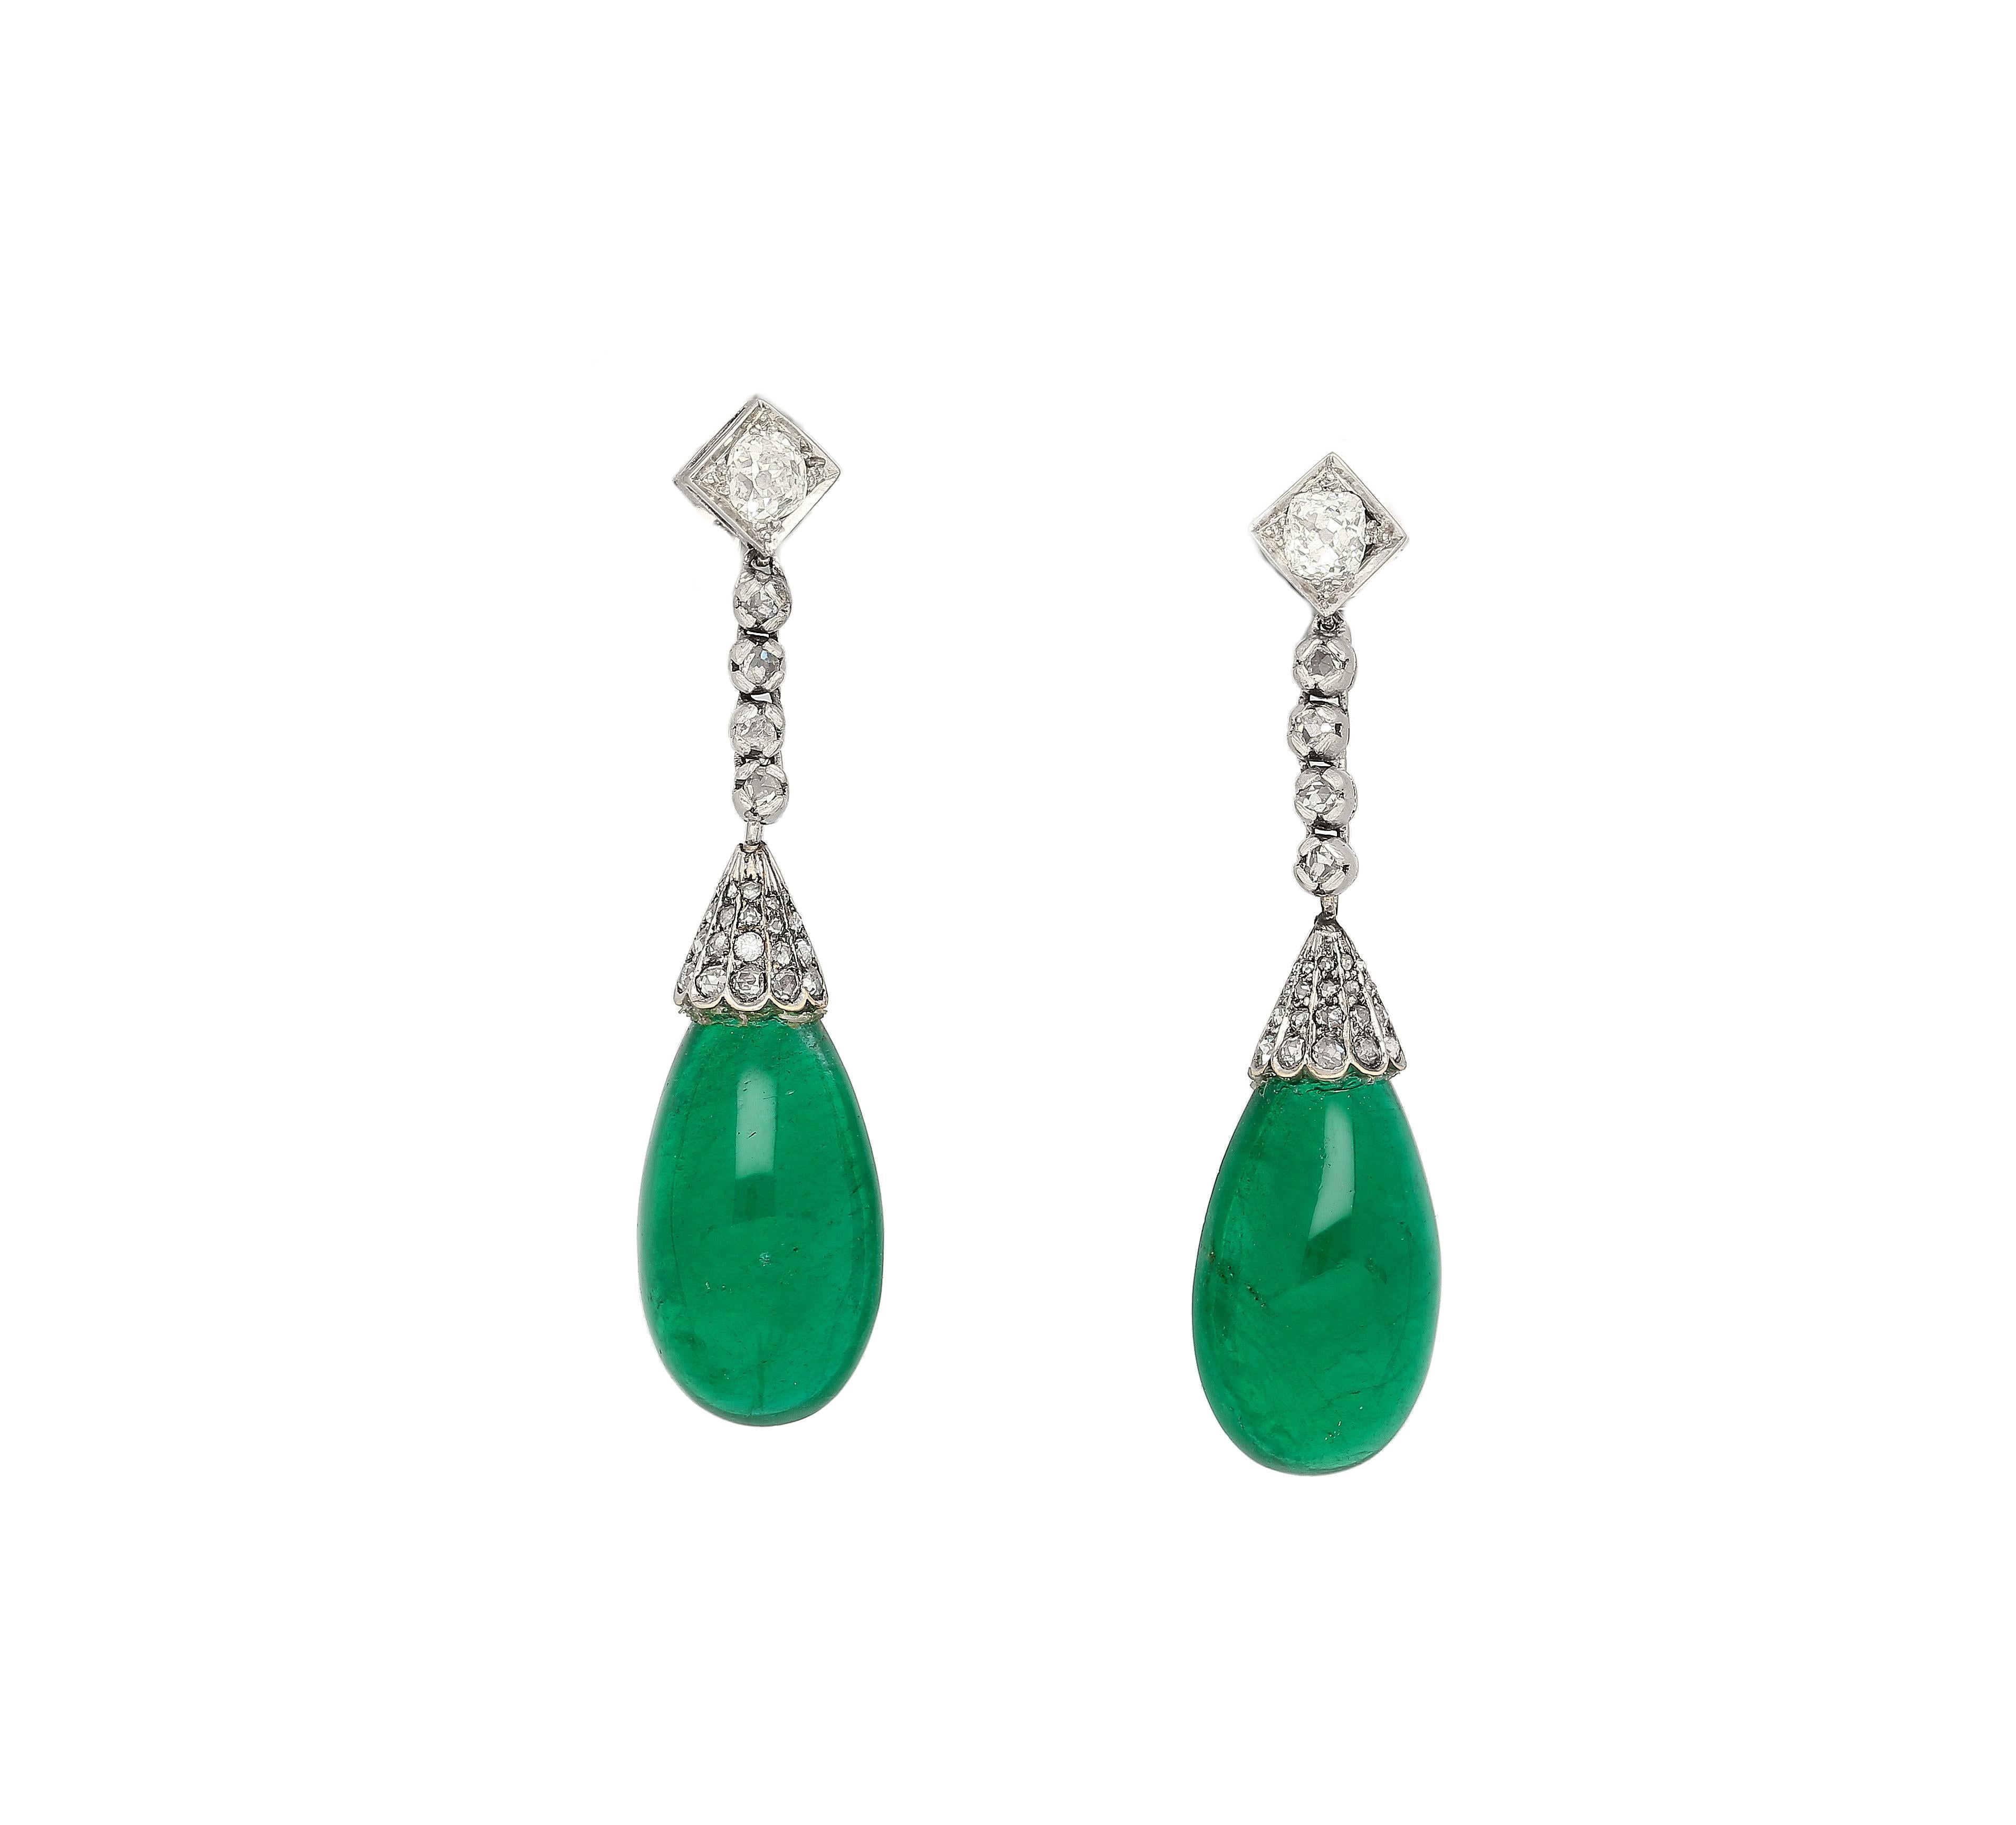 Vintage Art Deco Zambian Emerald and diamond drop earrings in 18k white gold. These earrings are 100% vintage, with all parts and pieces of original Art Deco circa 1940. 

The Emeralds are extremely vibrant, transparent, and full of life. A near